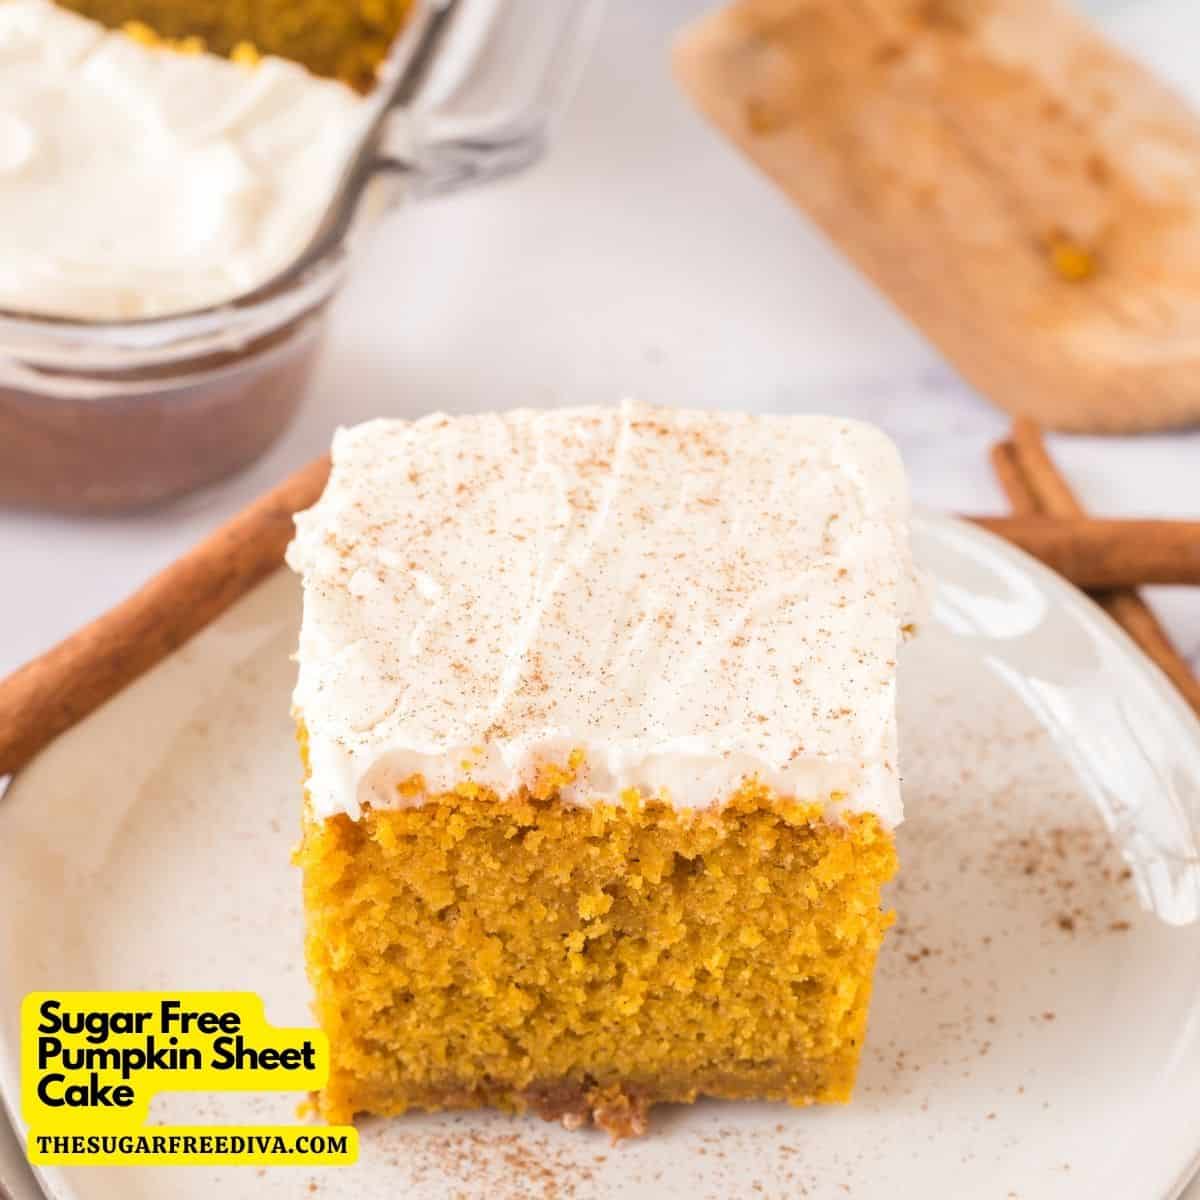 Sugar Free Pumpkin Sheet Cake, an easy and delicious dessert recipe made with pumpkin puree, warm spices, and no added sugar. 